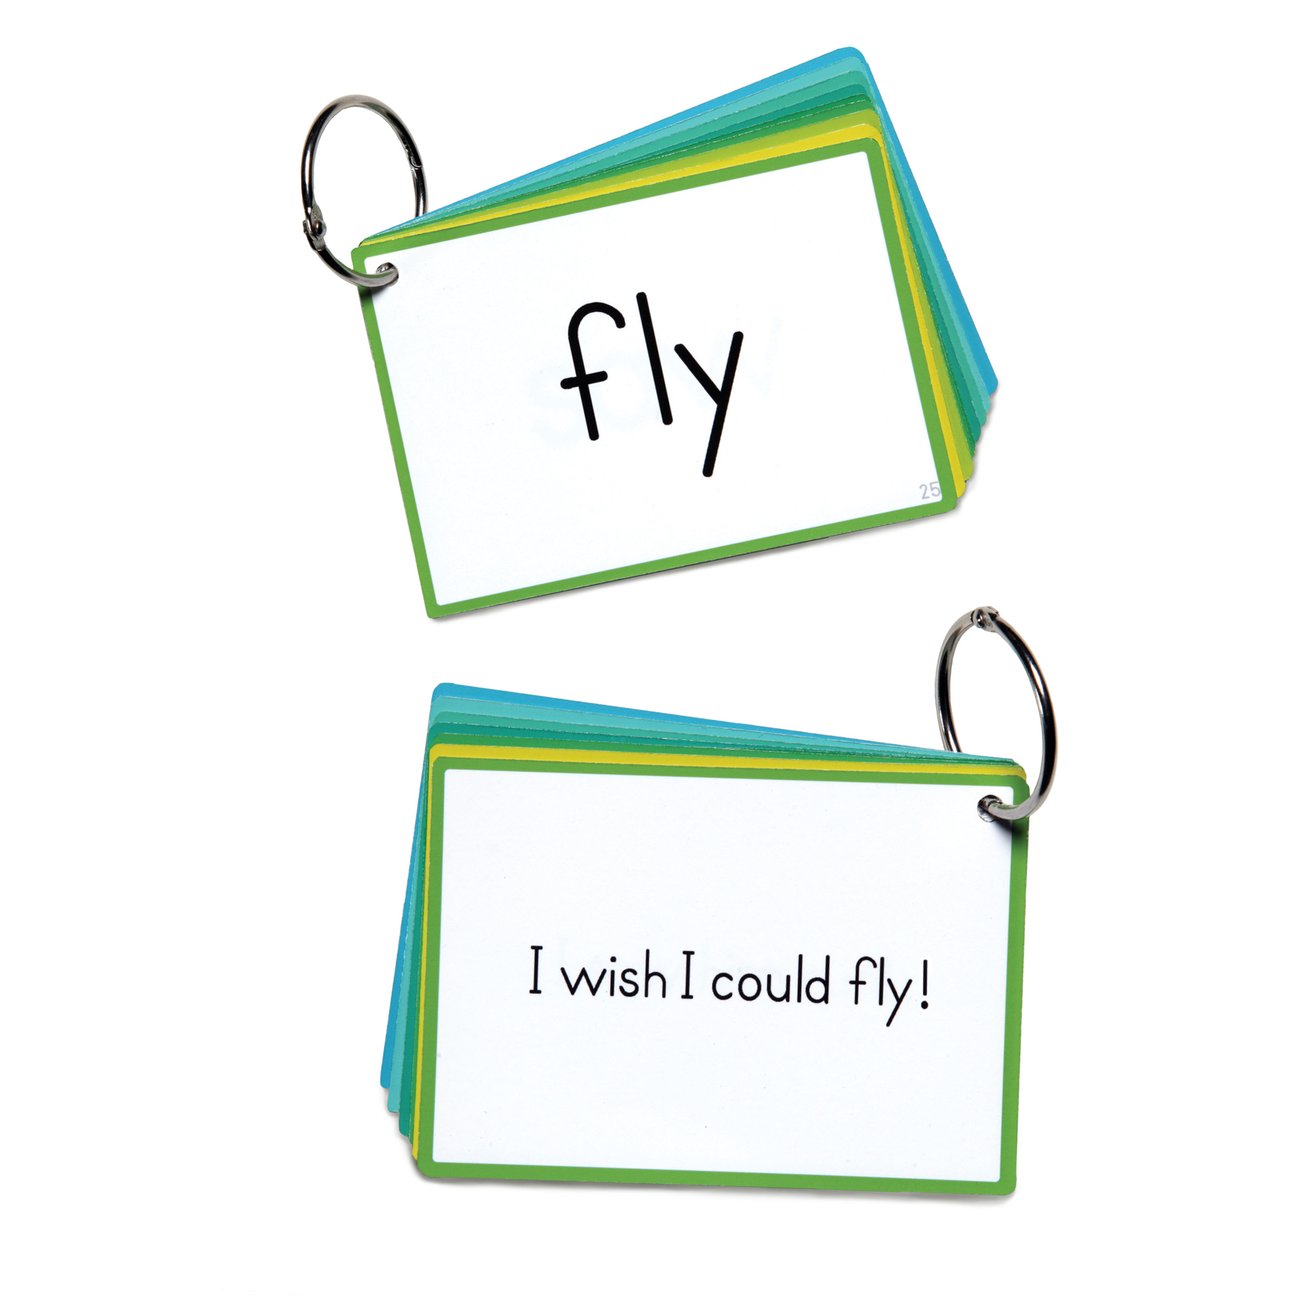 100 Sight Words Flash Cards, Level 2